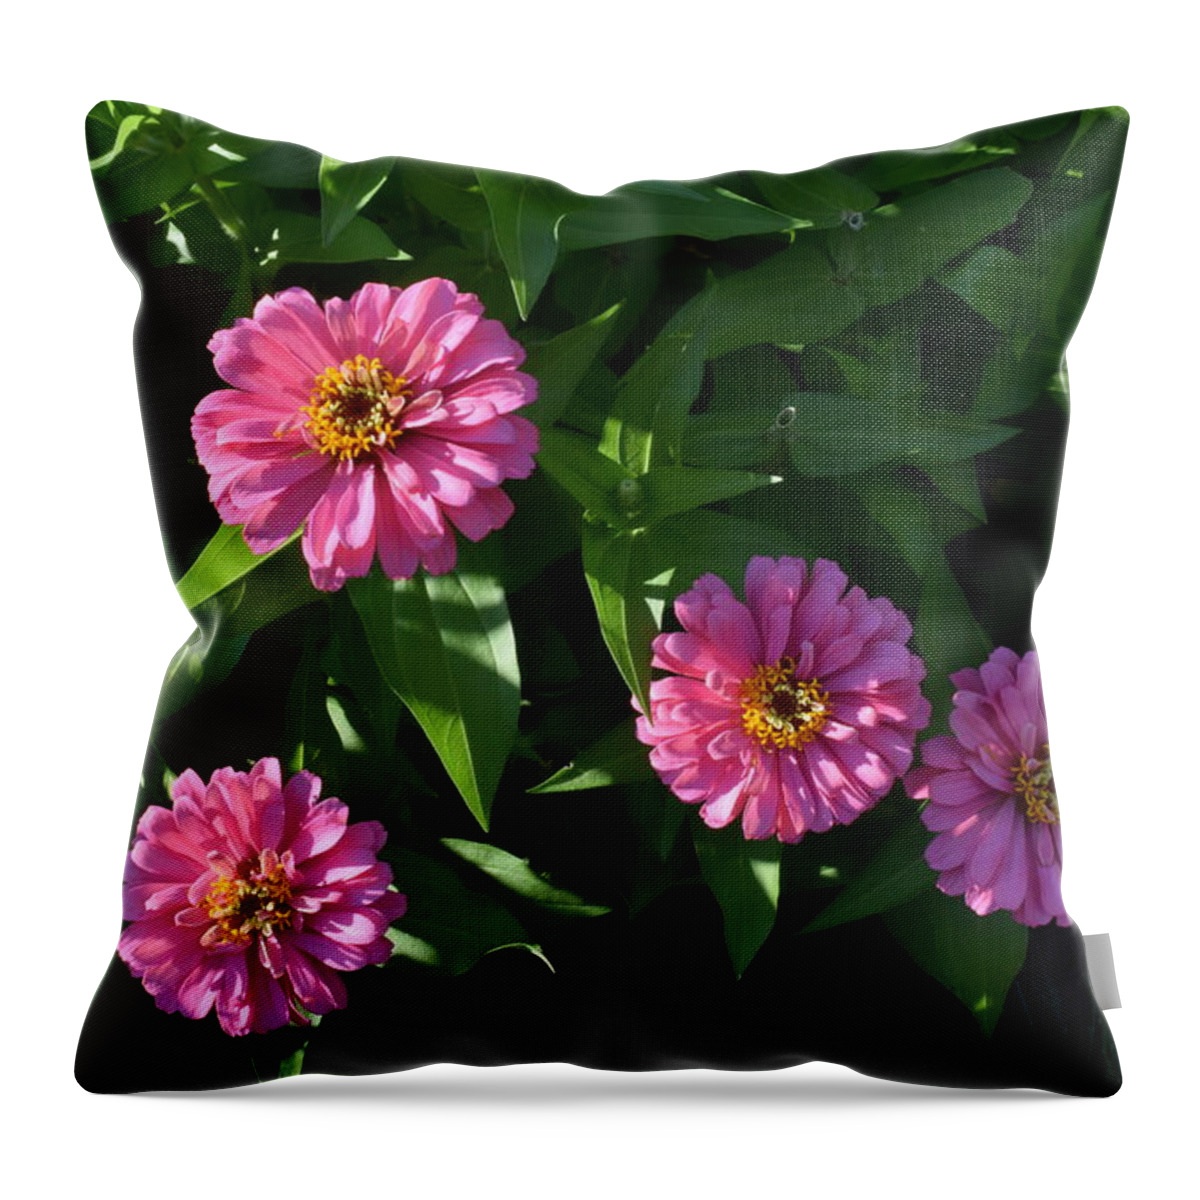 Flowers Throw Pillow featuring the photograph Four Lovely Sisters by Deborah Crew-Johnson